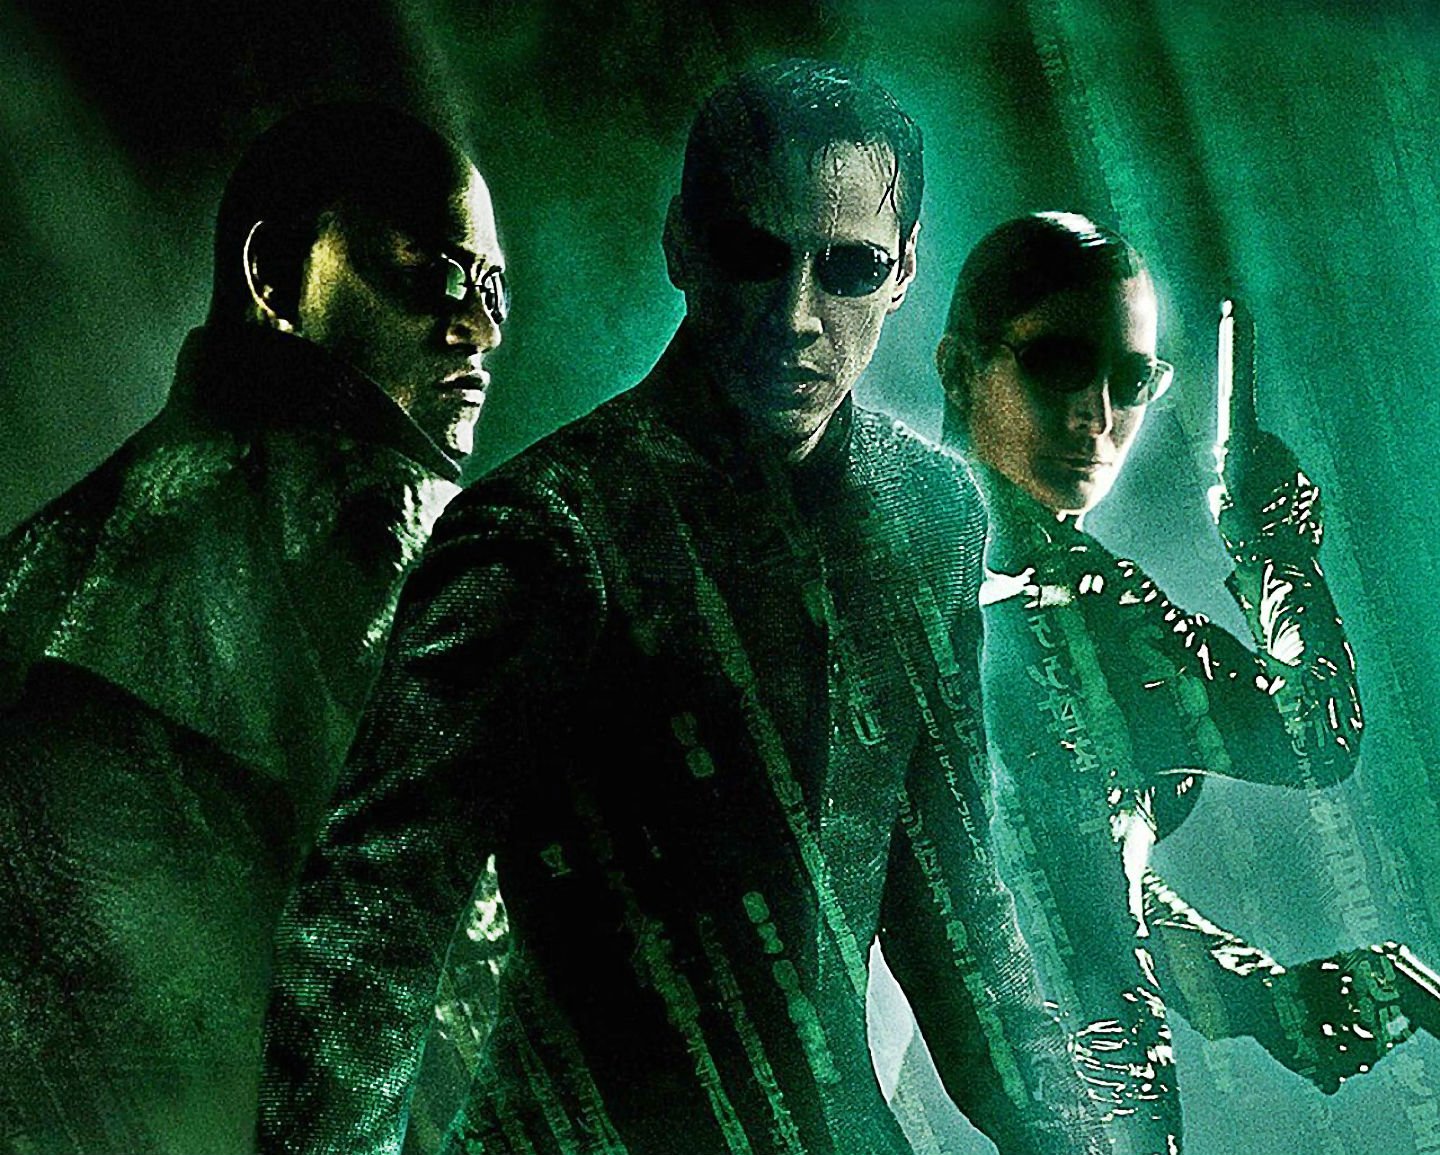 Matrix Sci Fi Science Fiction Action Fighting